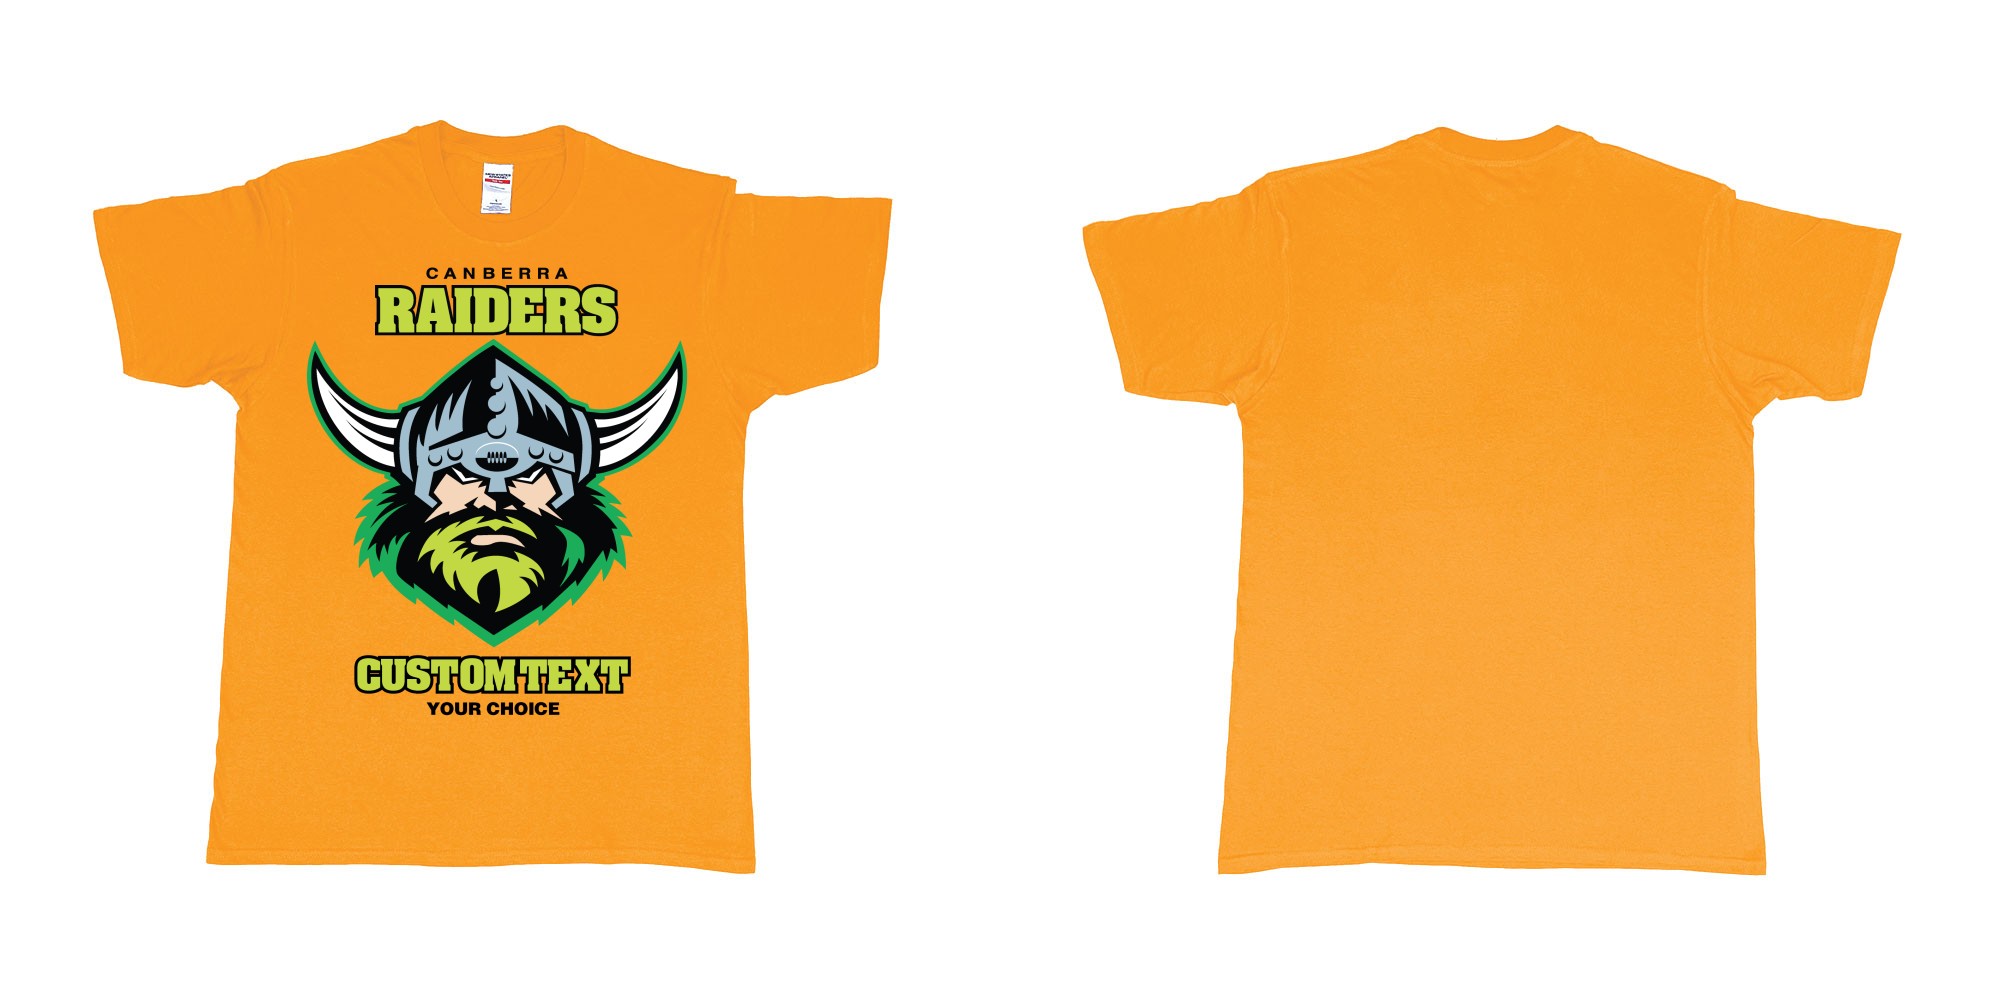 Custom tshirt design canberra raiders nrl logo own printed text near you in fabric color gold choice your own text made in Bali by The Pirate Way